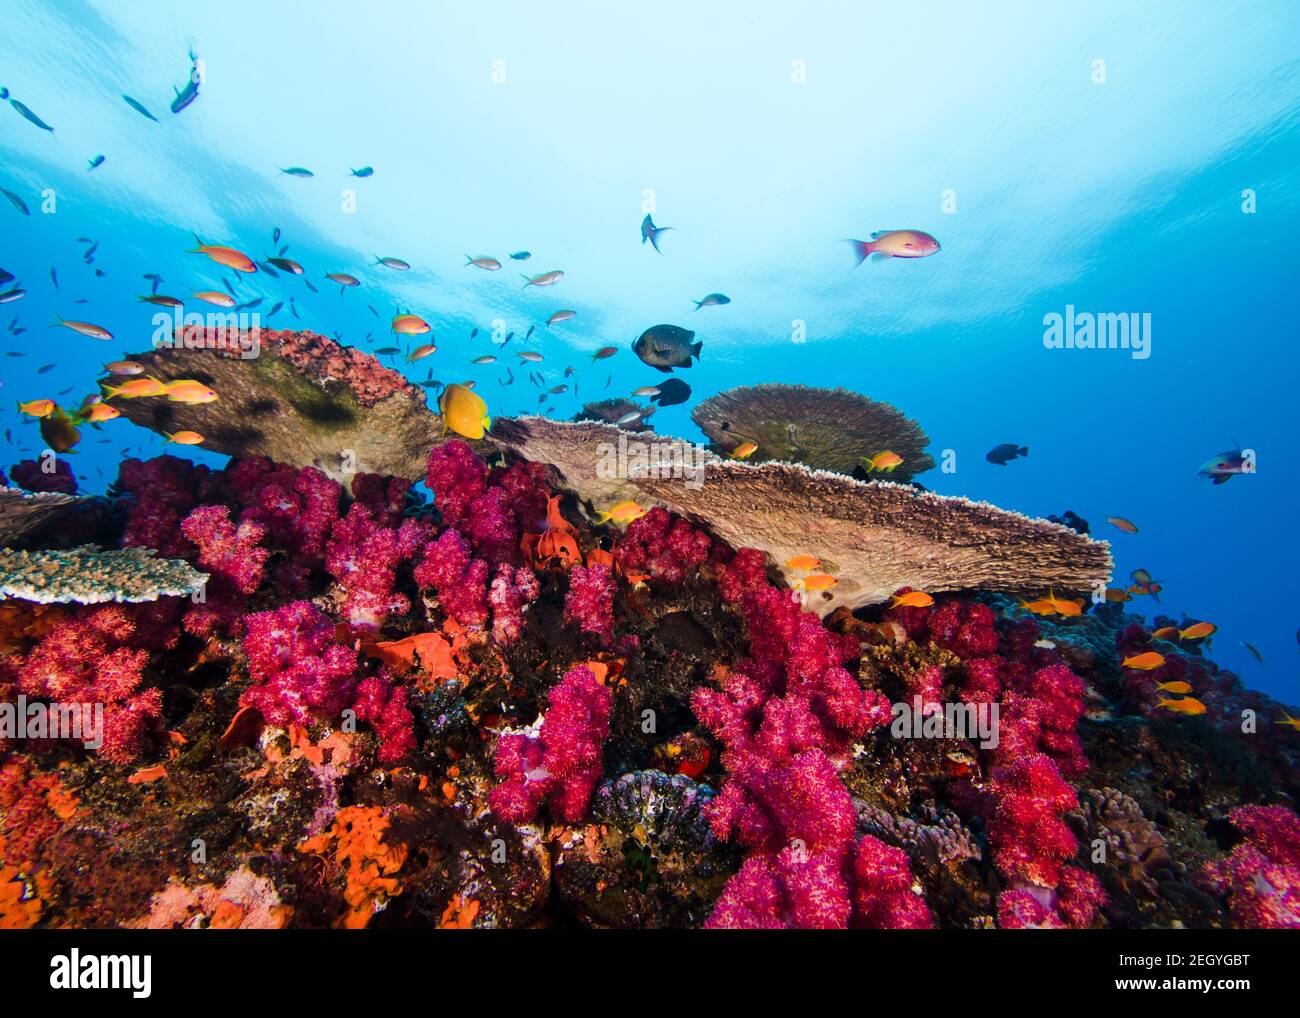 Bright coral reef scene of pink Thistle soft corals and Plate coral,  with some small fish swimming around Stock Photo